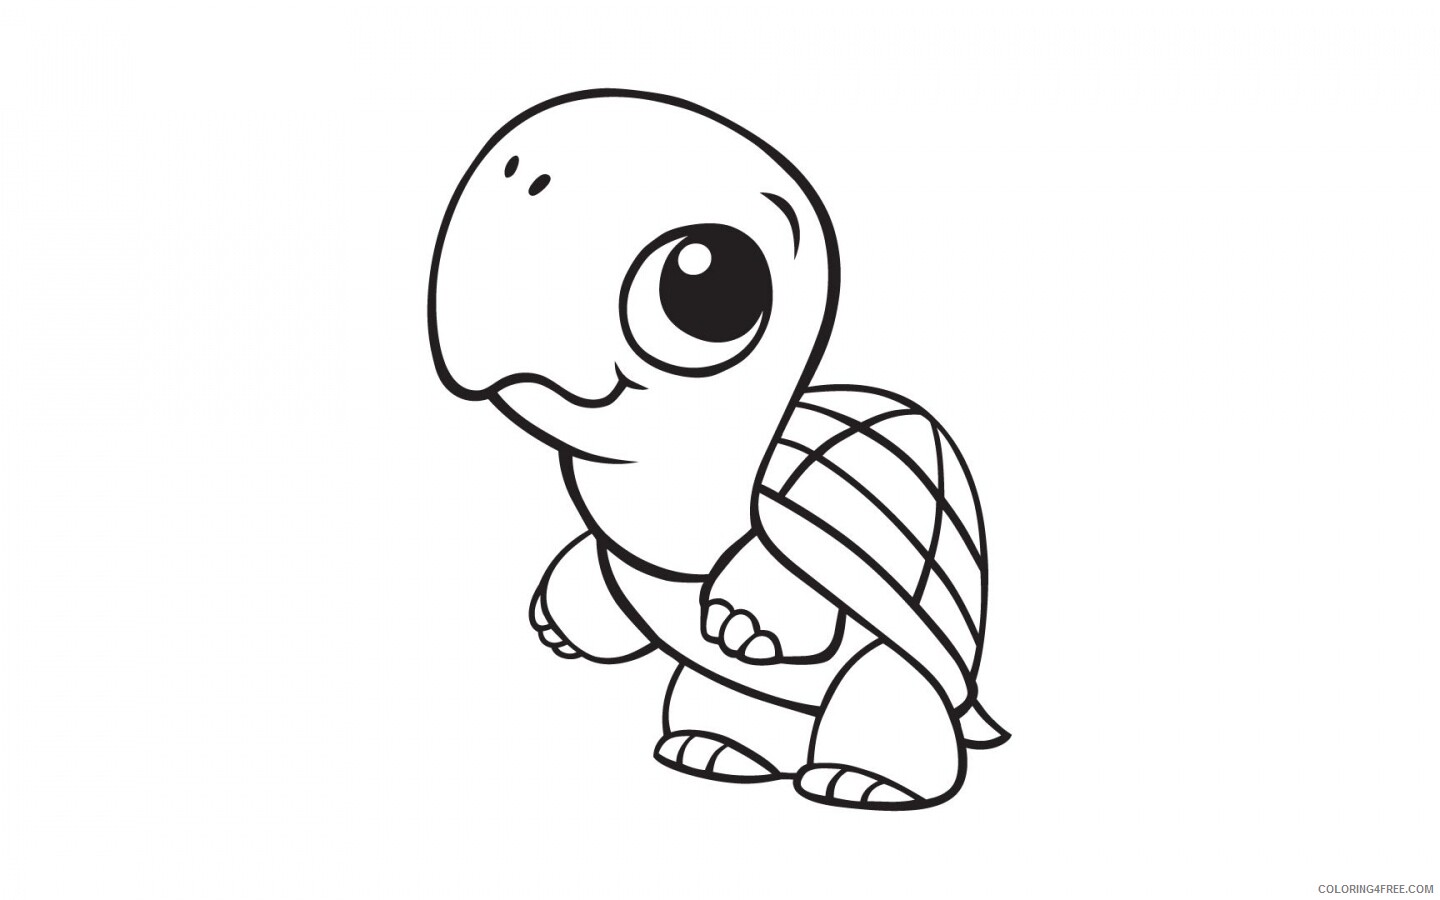 Turtle Coloring Pages Animal Printable Sheets Cutte Baby Turtle 2021 4900 Coloring4free